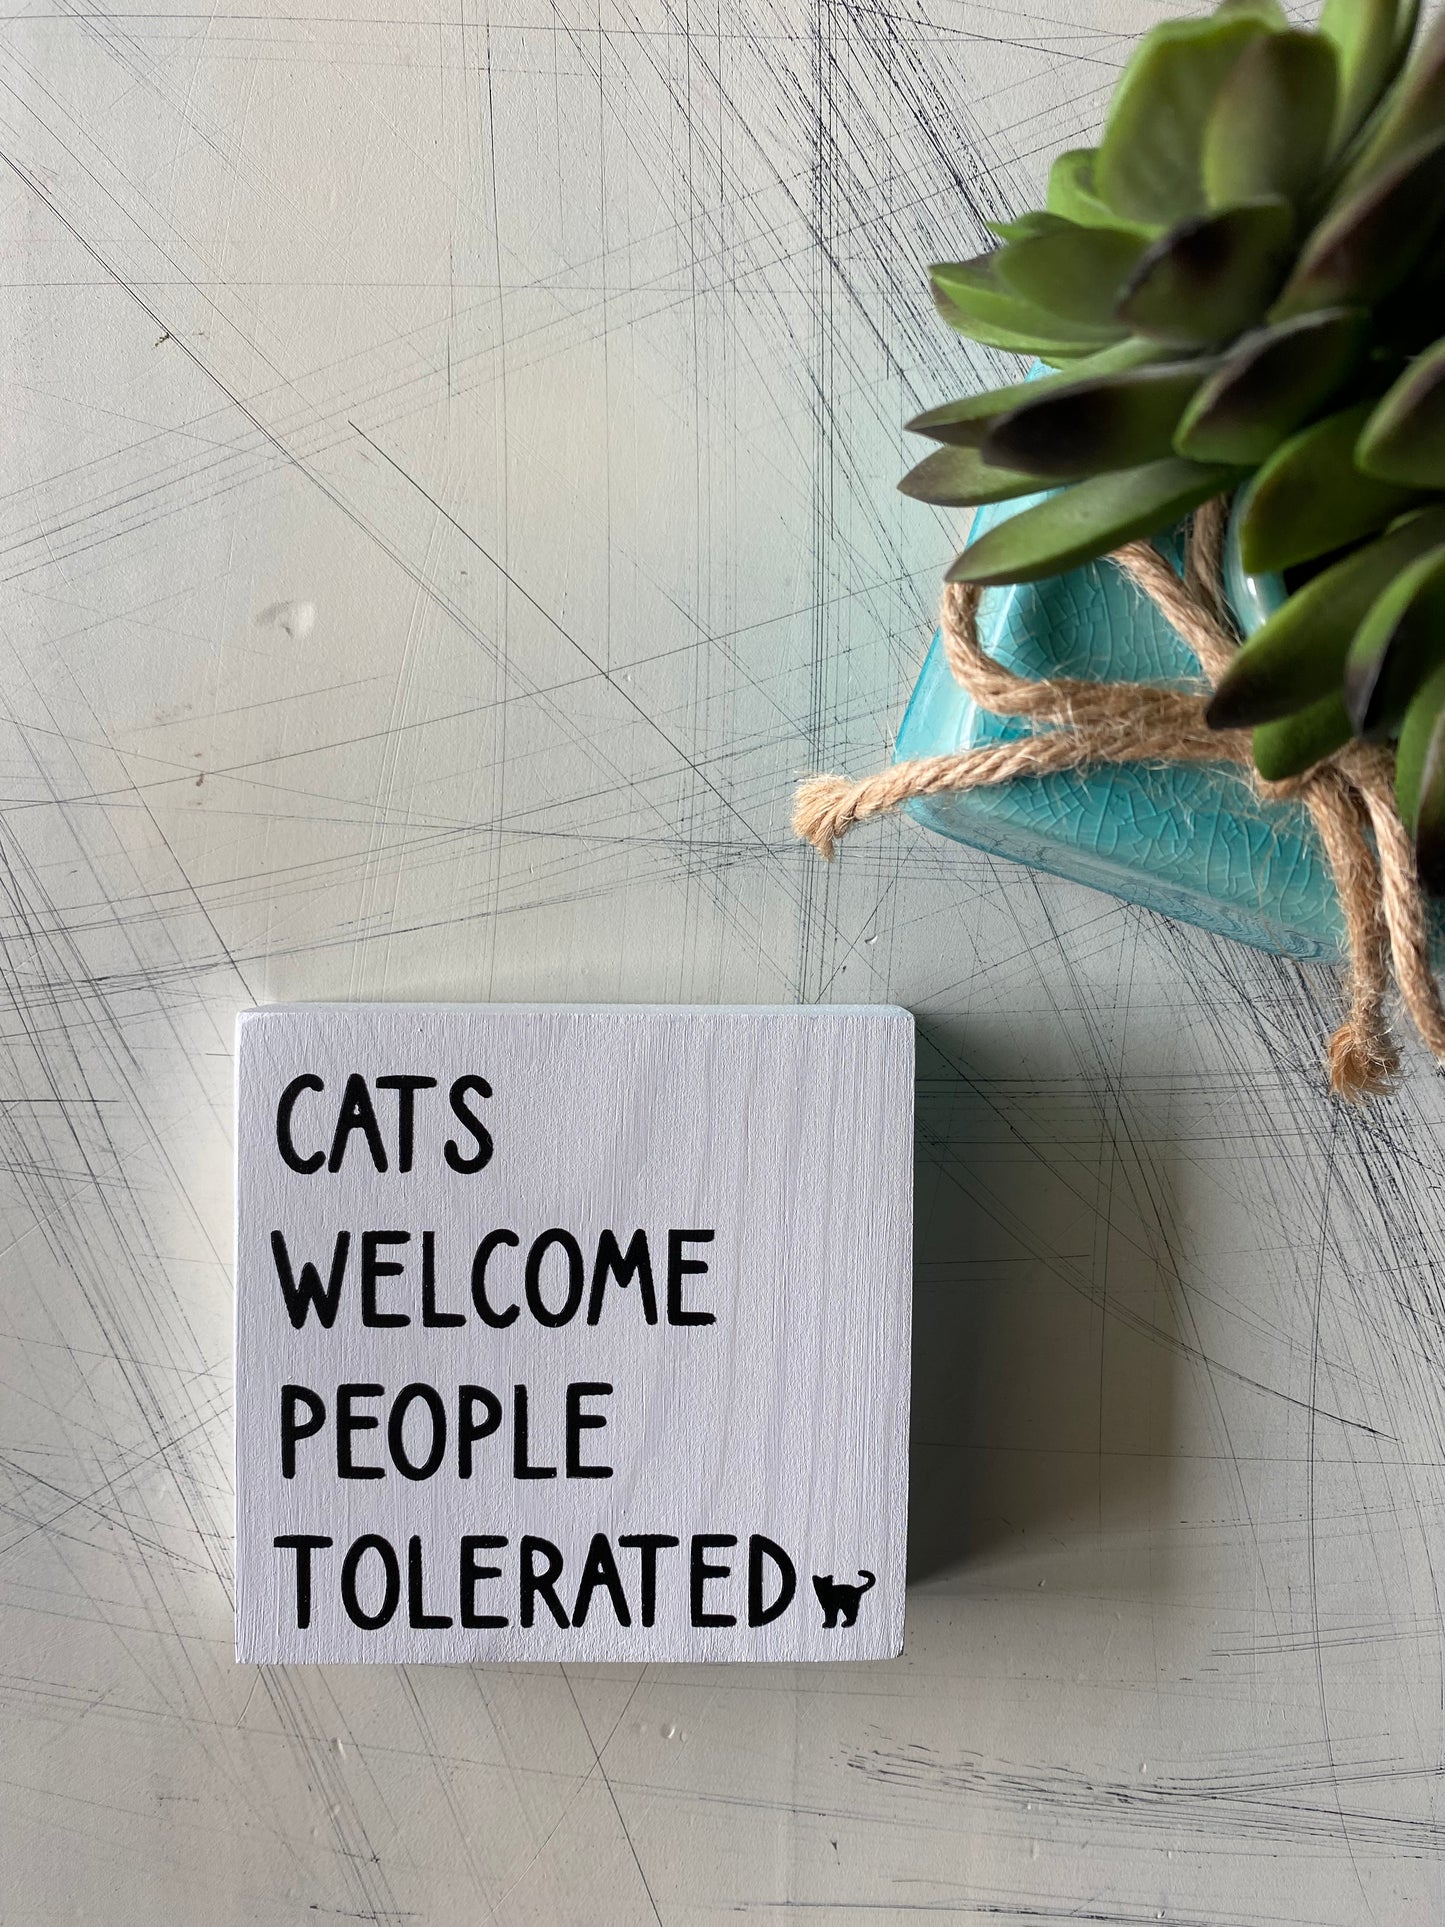 Cats welcome, people tolerated - handmade mini wood sign